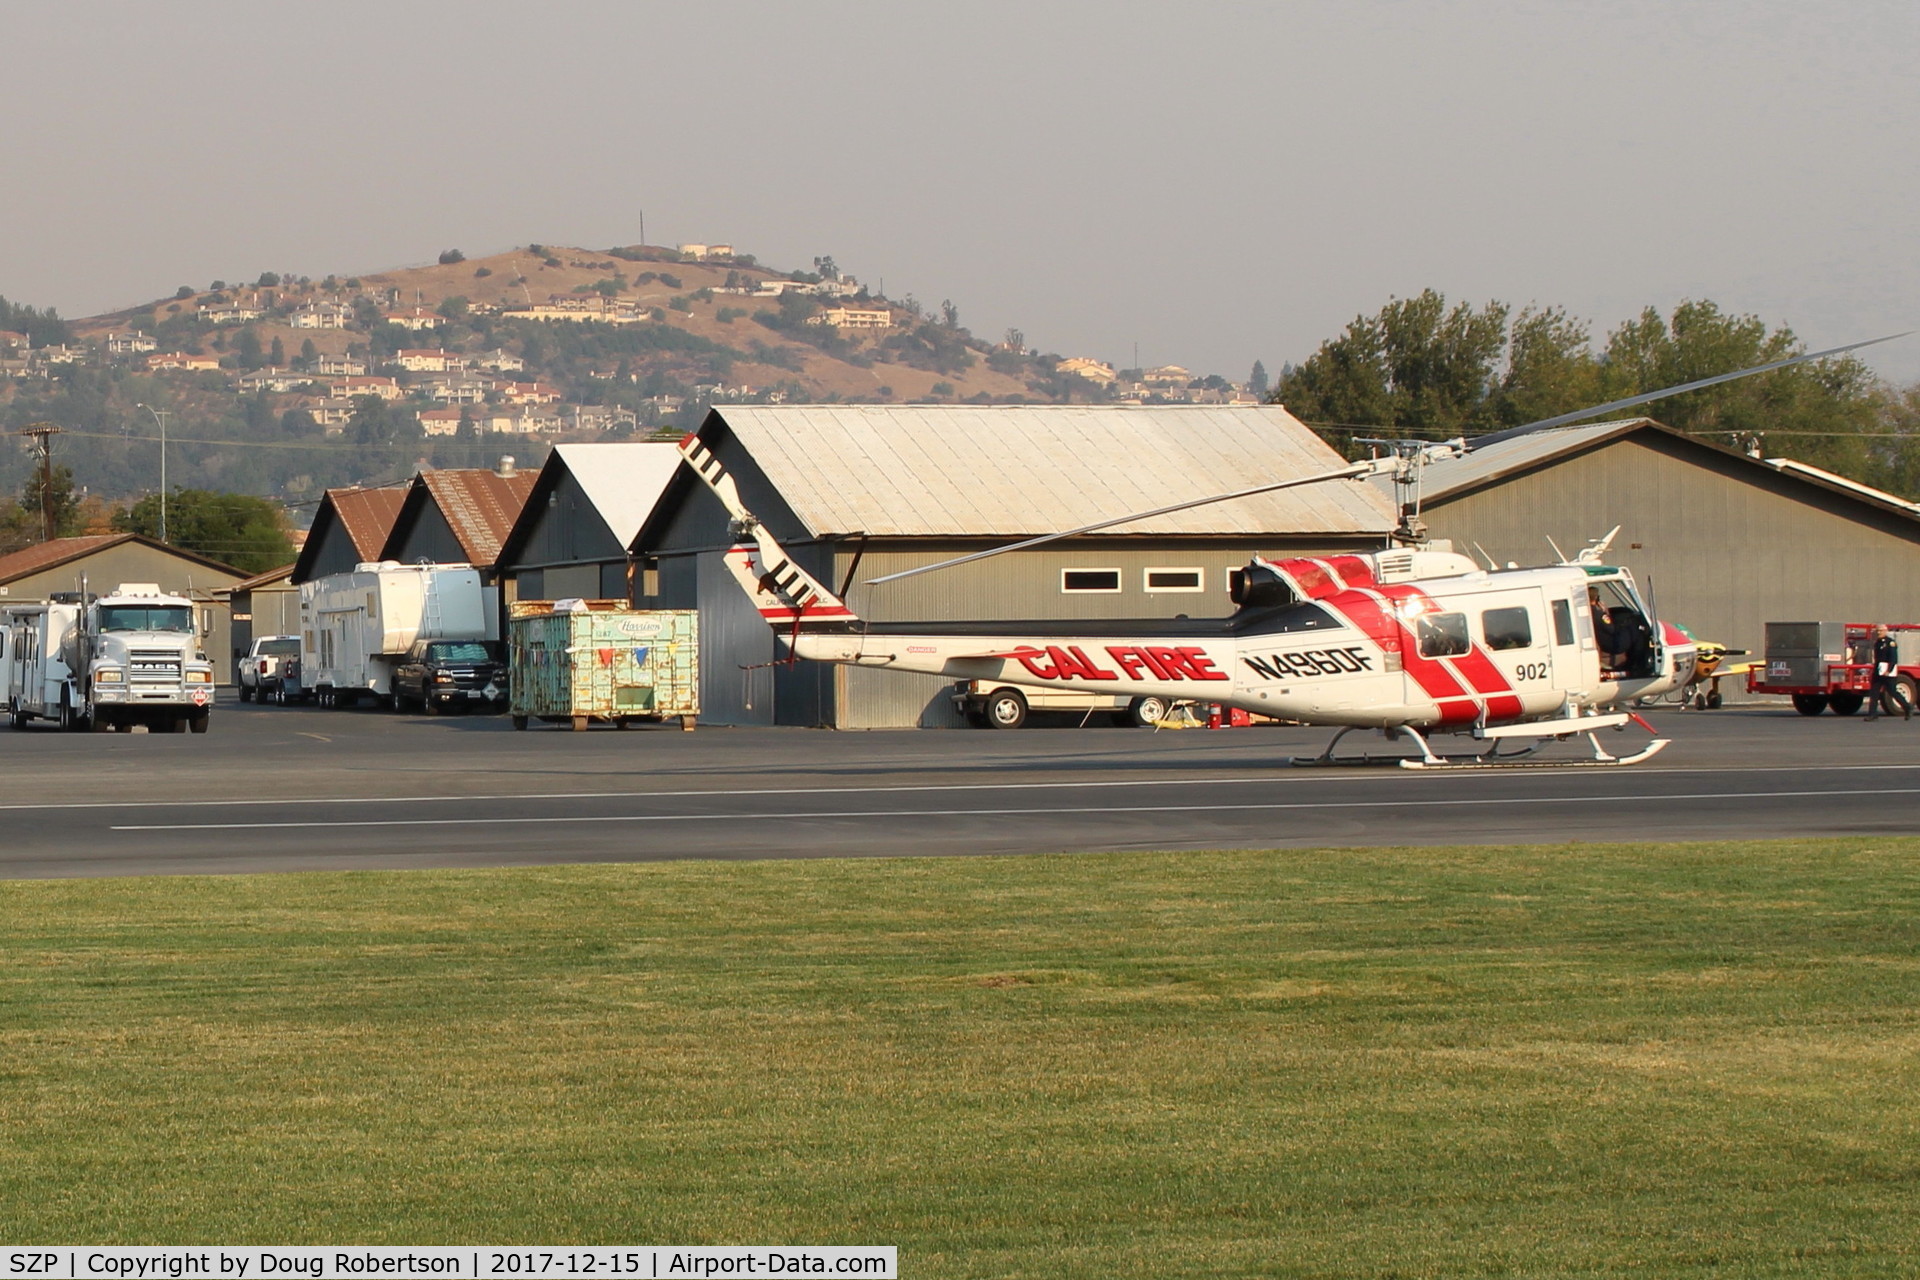 Santa Paula Airport (SZP) - N496DF 1969 Bell EH1H IROQUOIS Turboshaft (CAL FIRE 902) and tankers-100LL and Jet-A